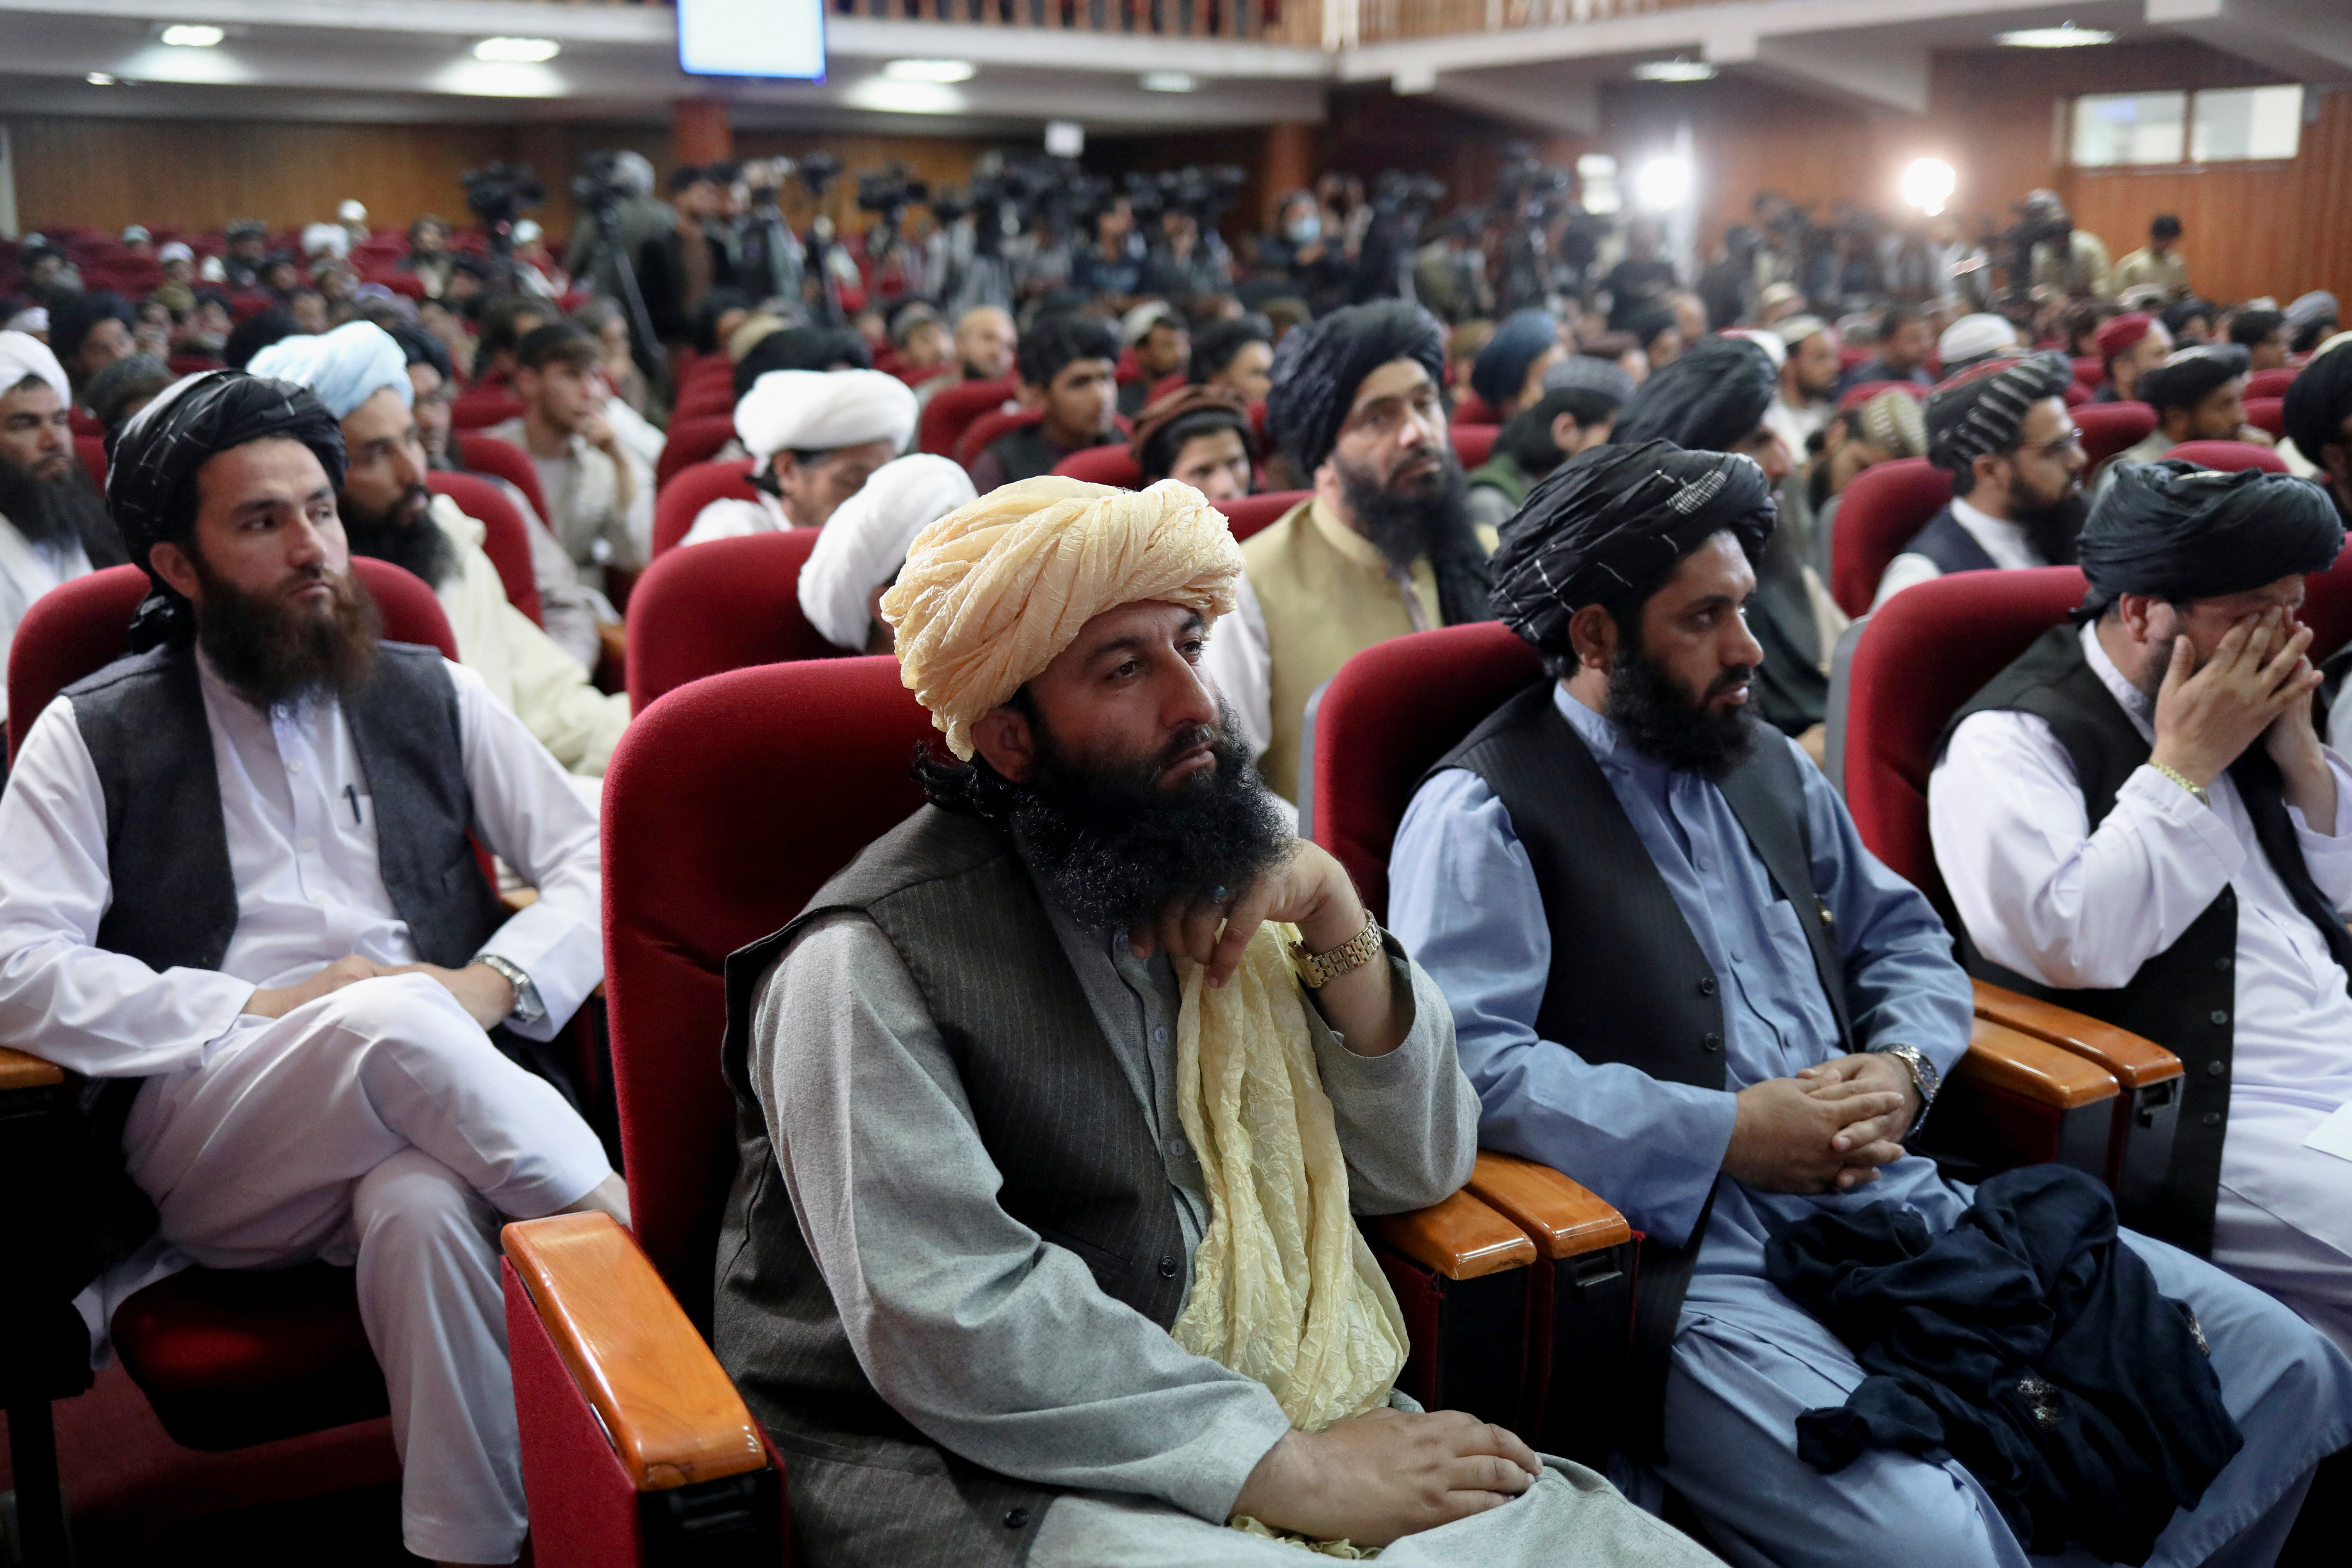 Members of the Taliban attend the news conference about a new command of hijab by Taliban leader Mullah Haibatullah Akhundzada, in Kabul